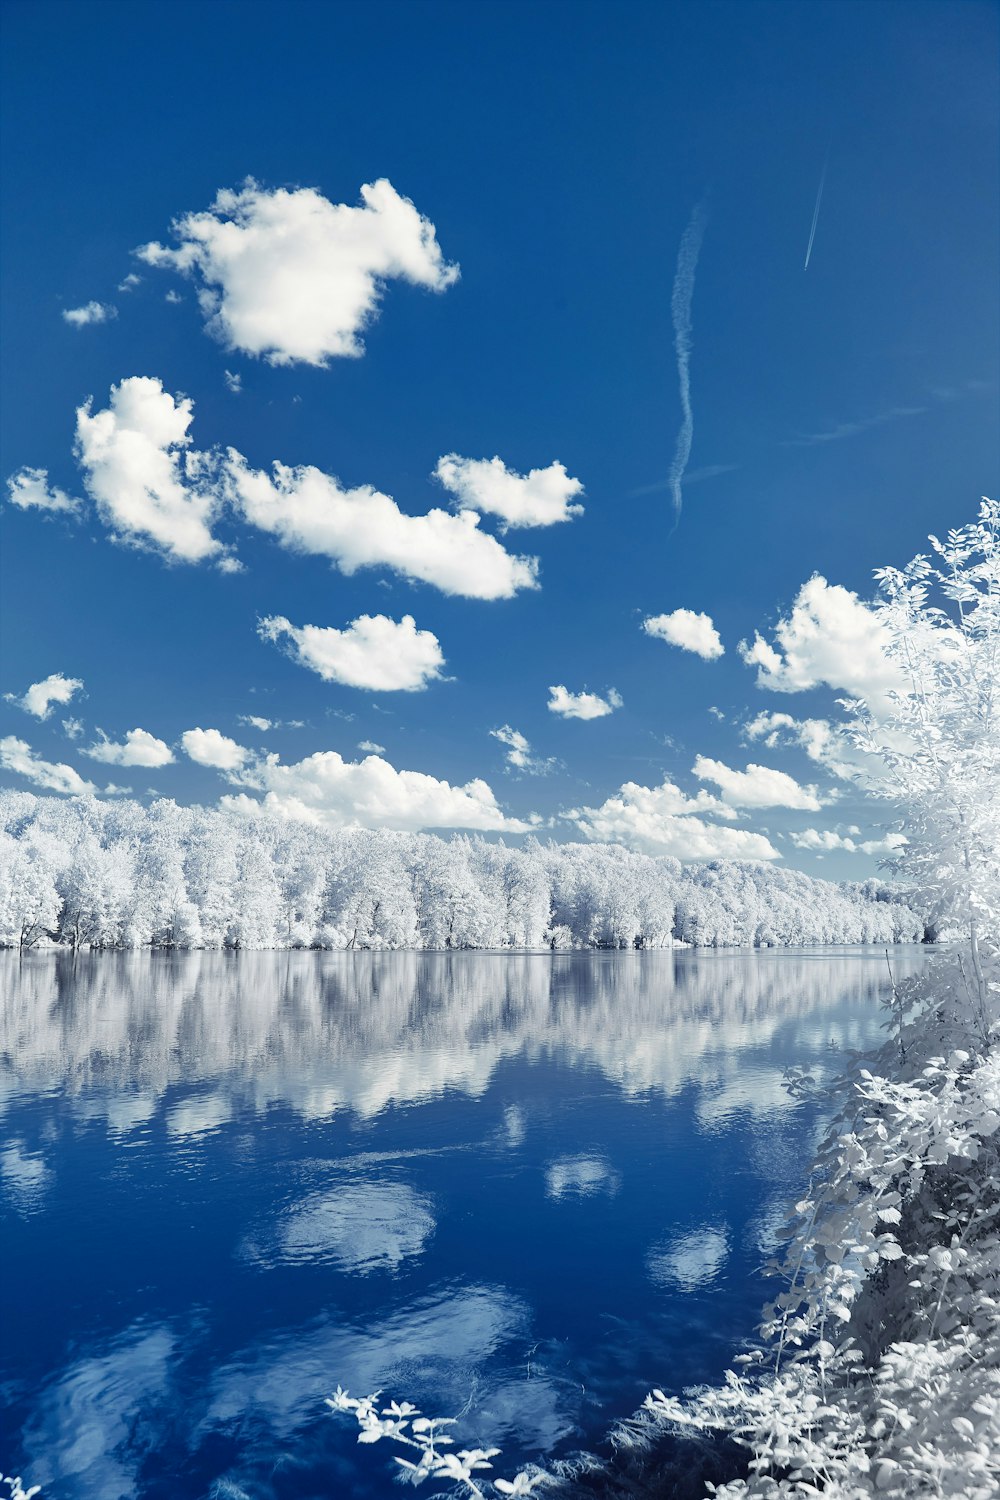 white snow covered trees beside blue body of water under blue sky and white clouds during